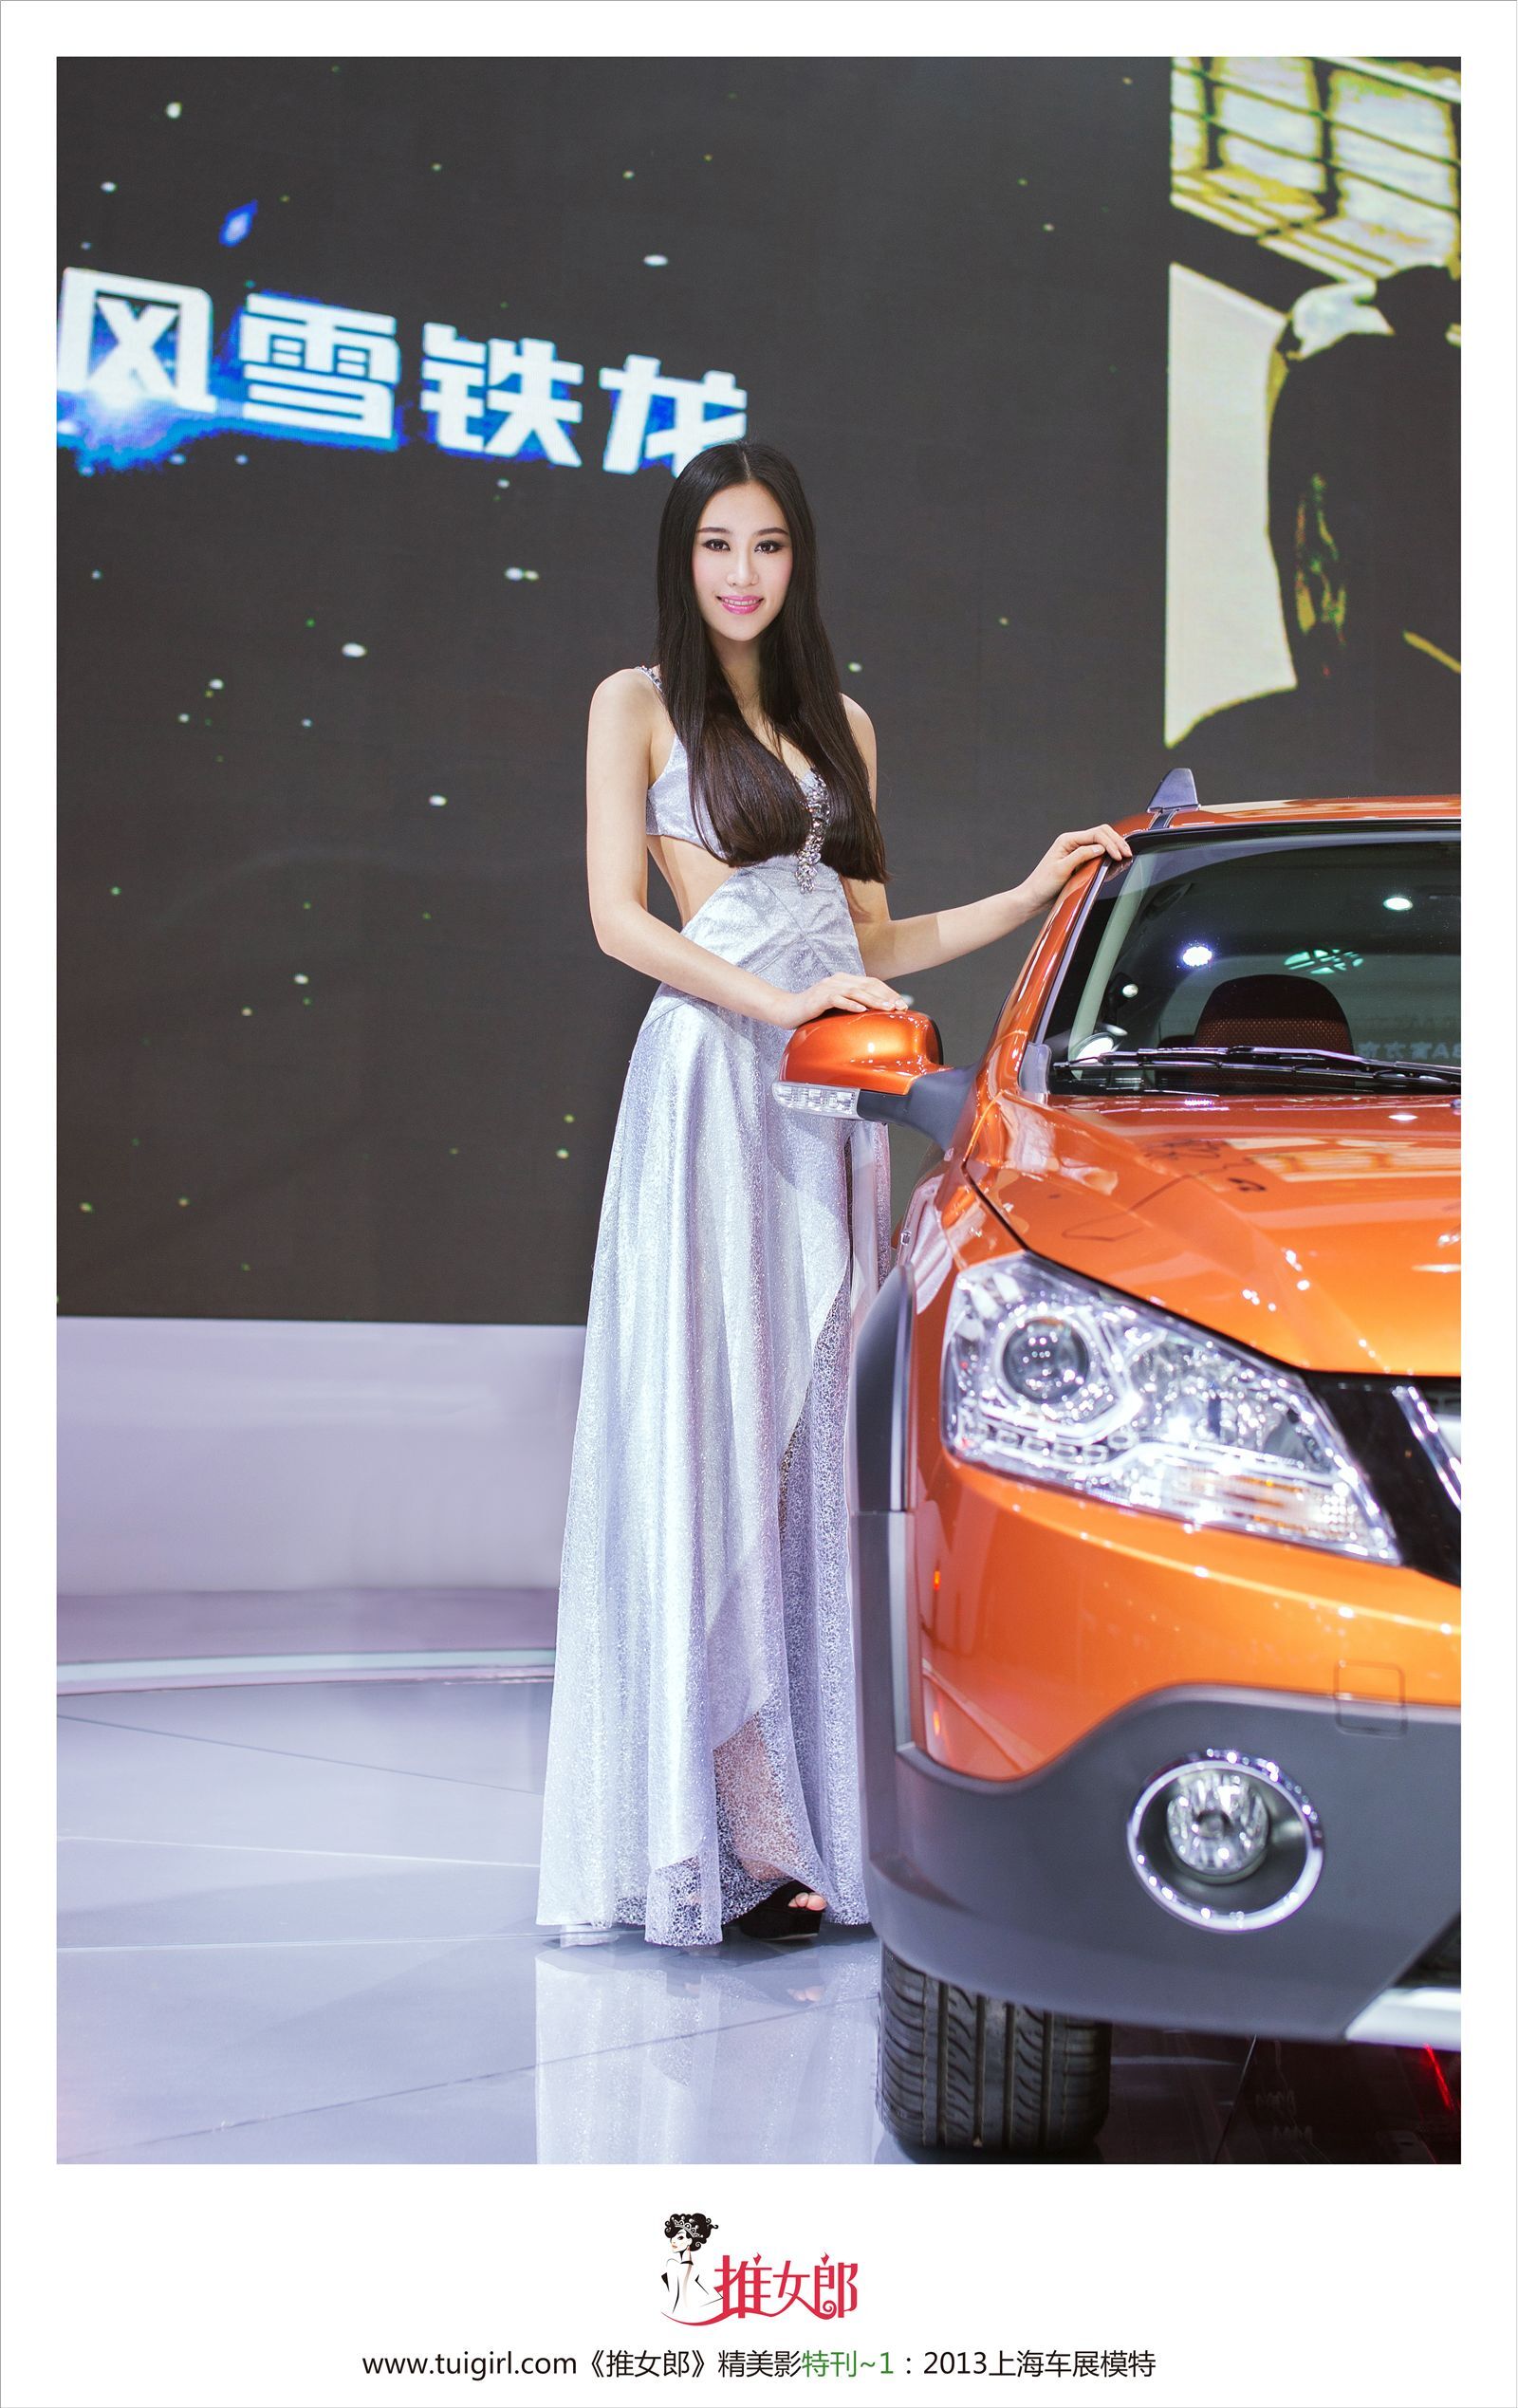 Special issue of Shanghai Auto Show